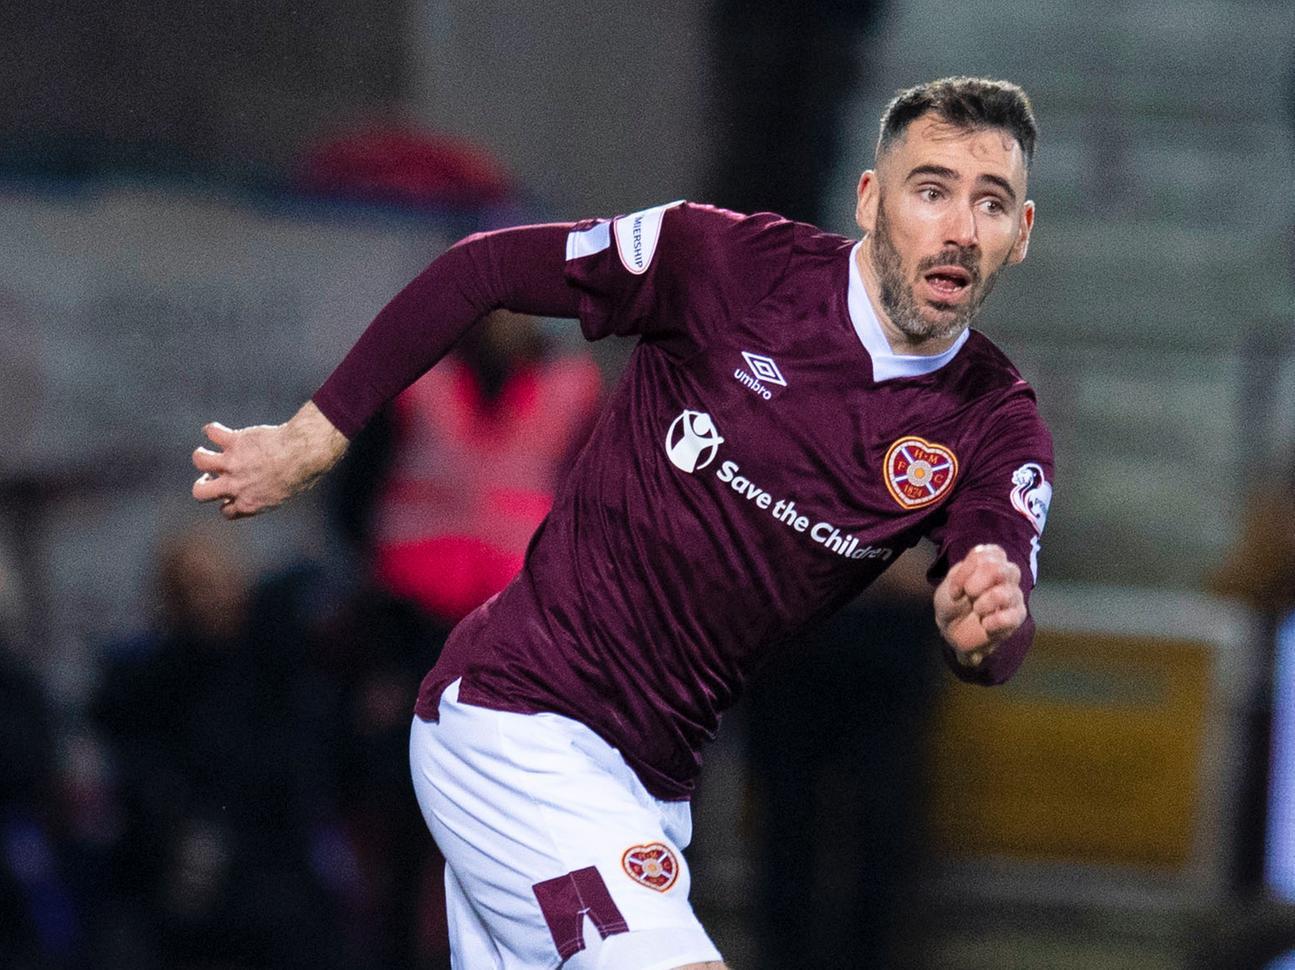 Like Hickey, picked up a first-half injury. Hearts will hope it's nothing serious.